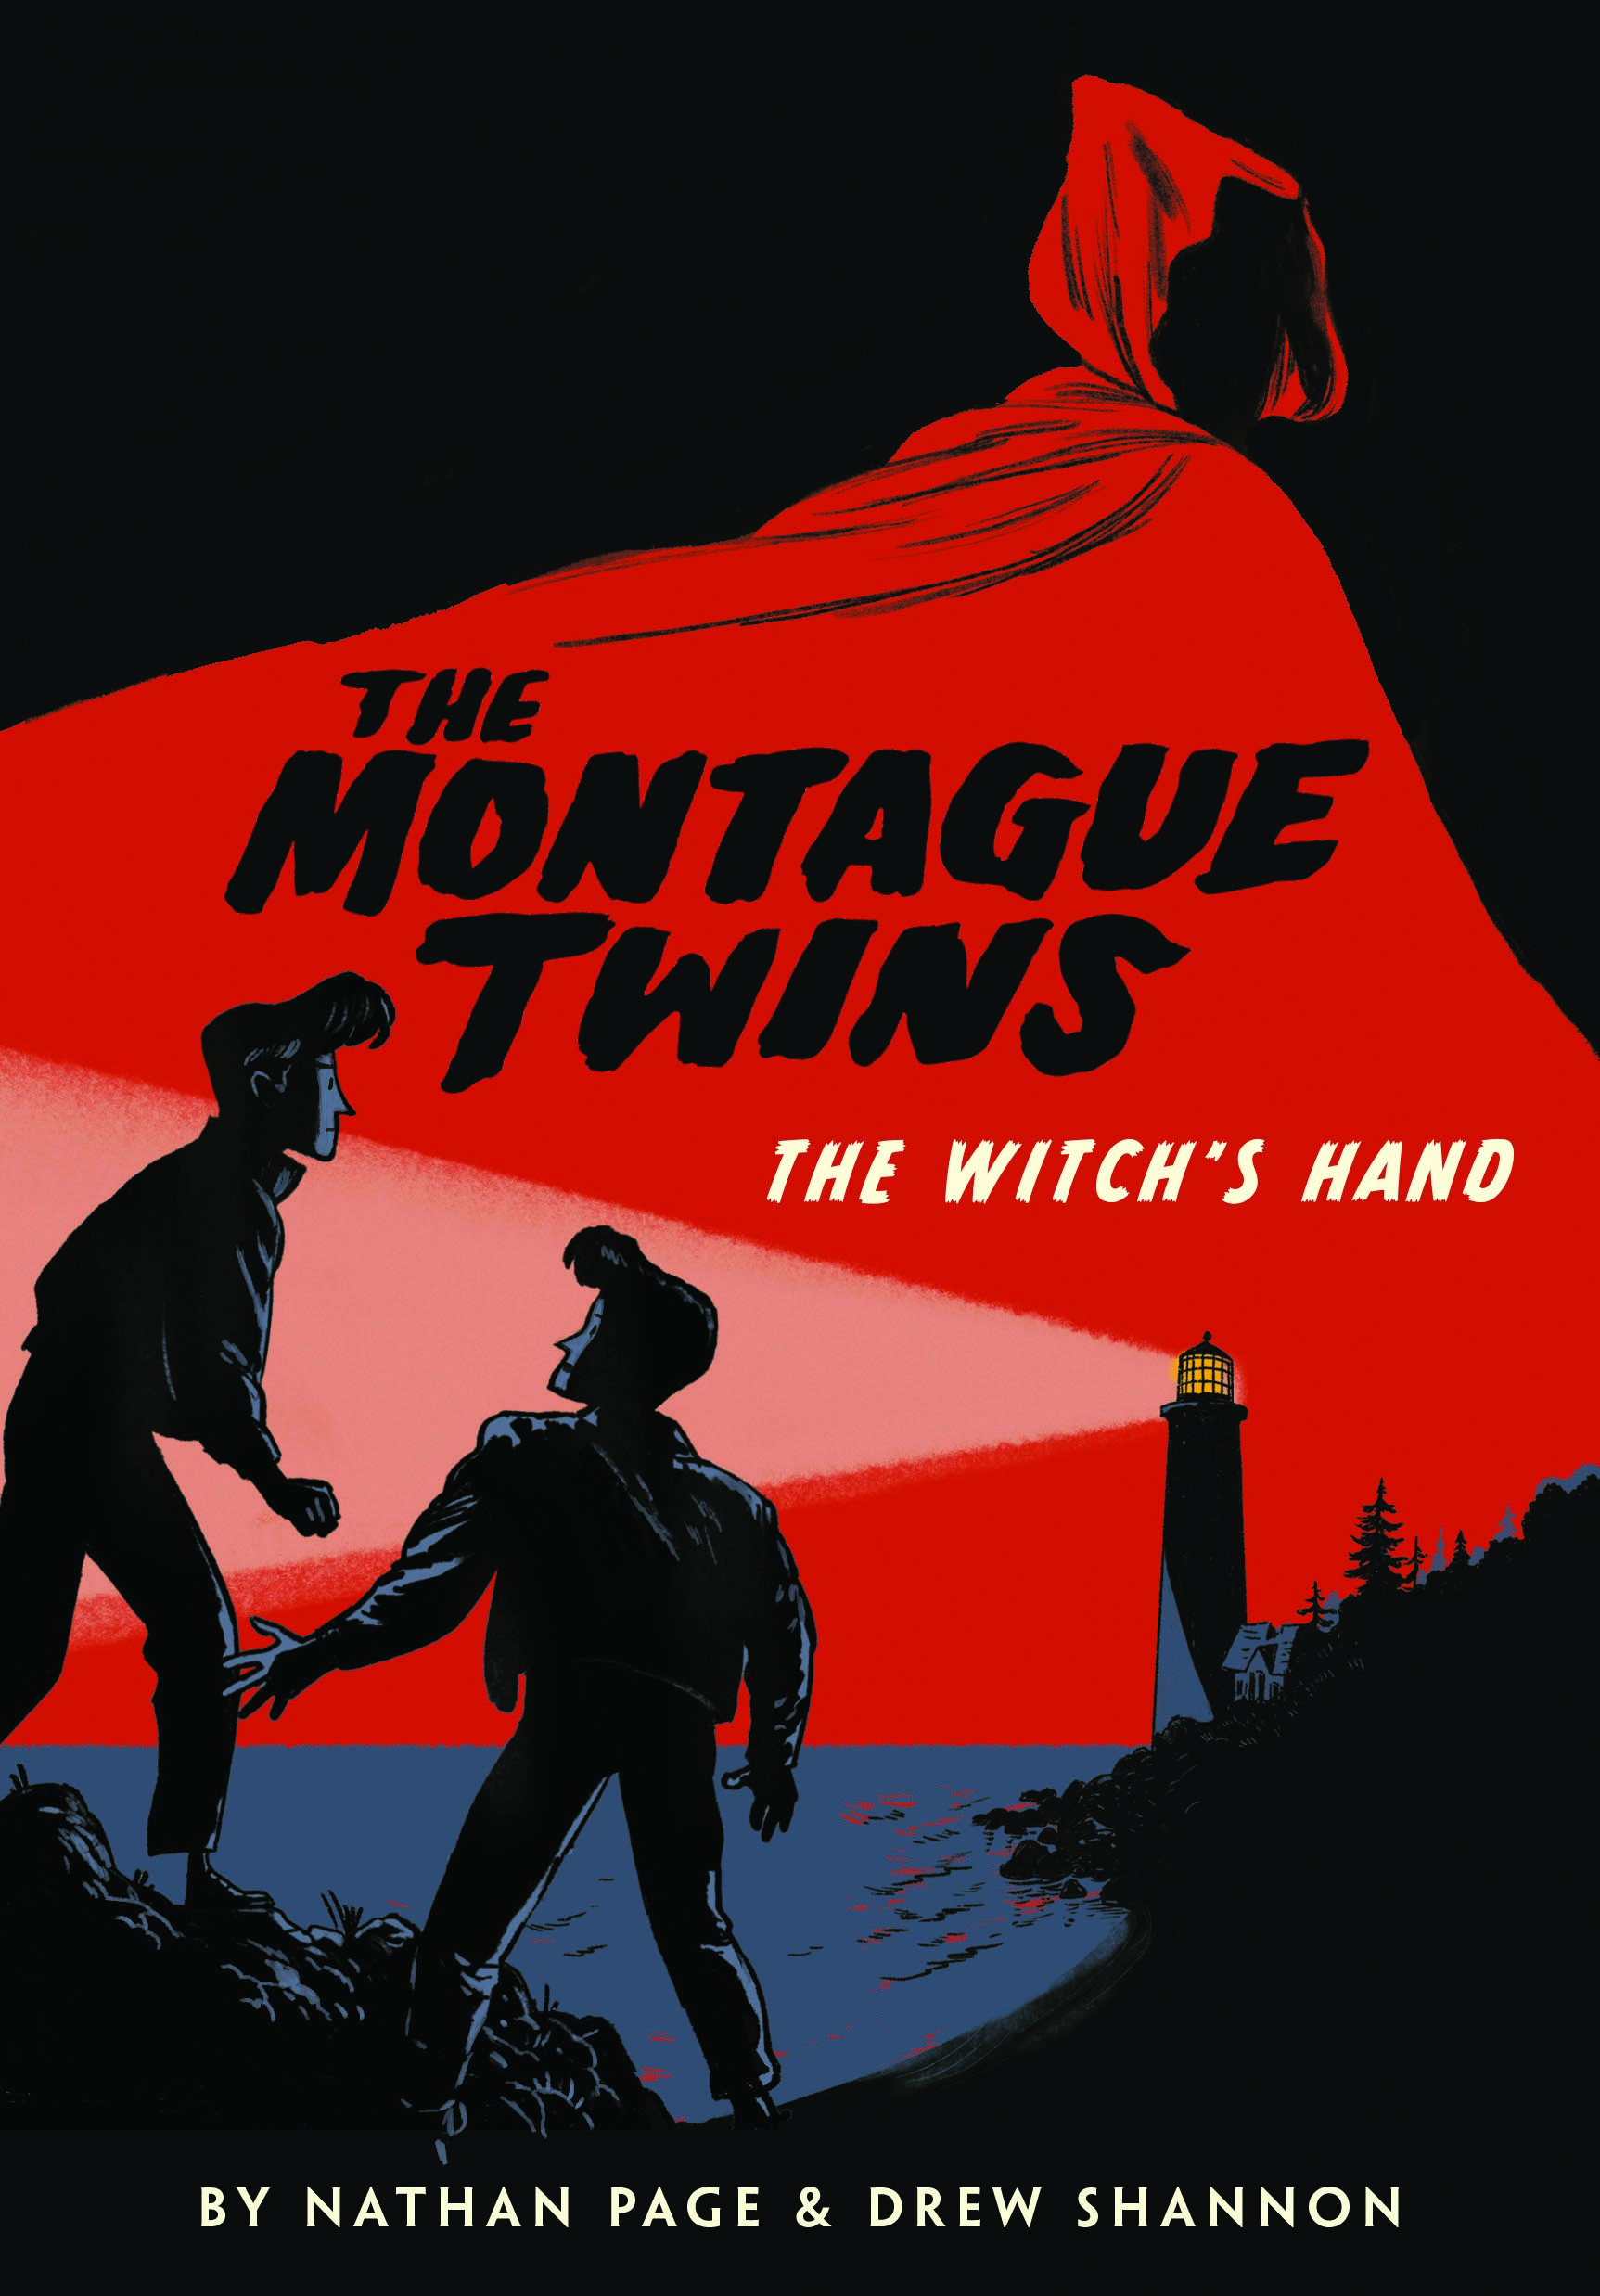 Cover of The Montague Twins with two boys in silhouette with a red background 